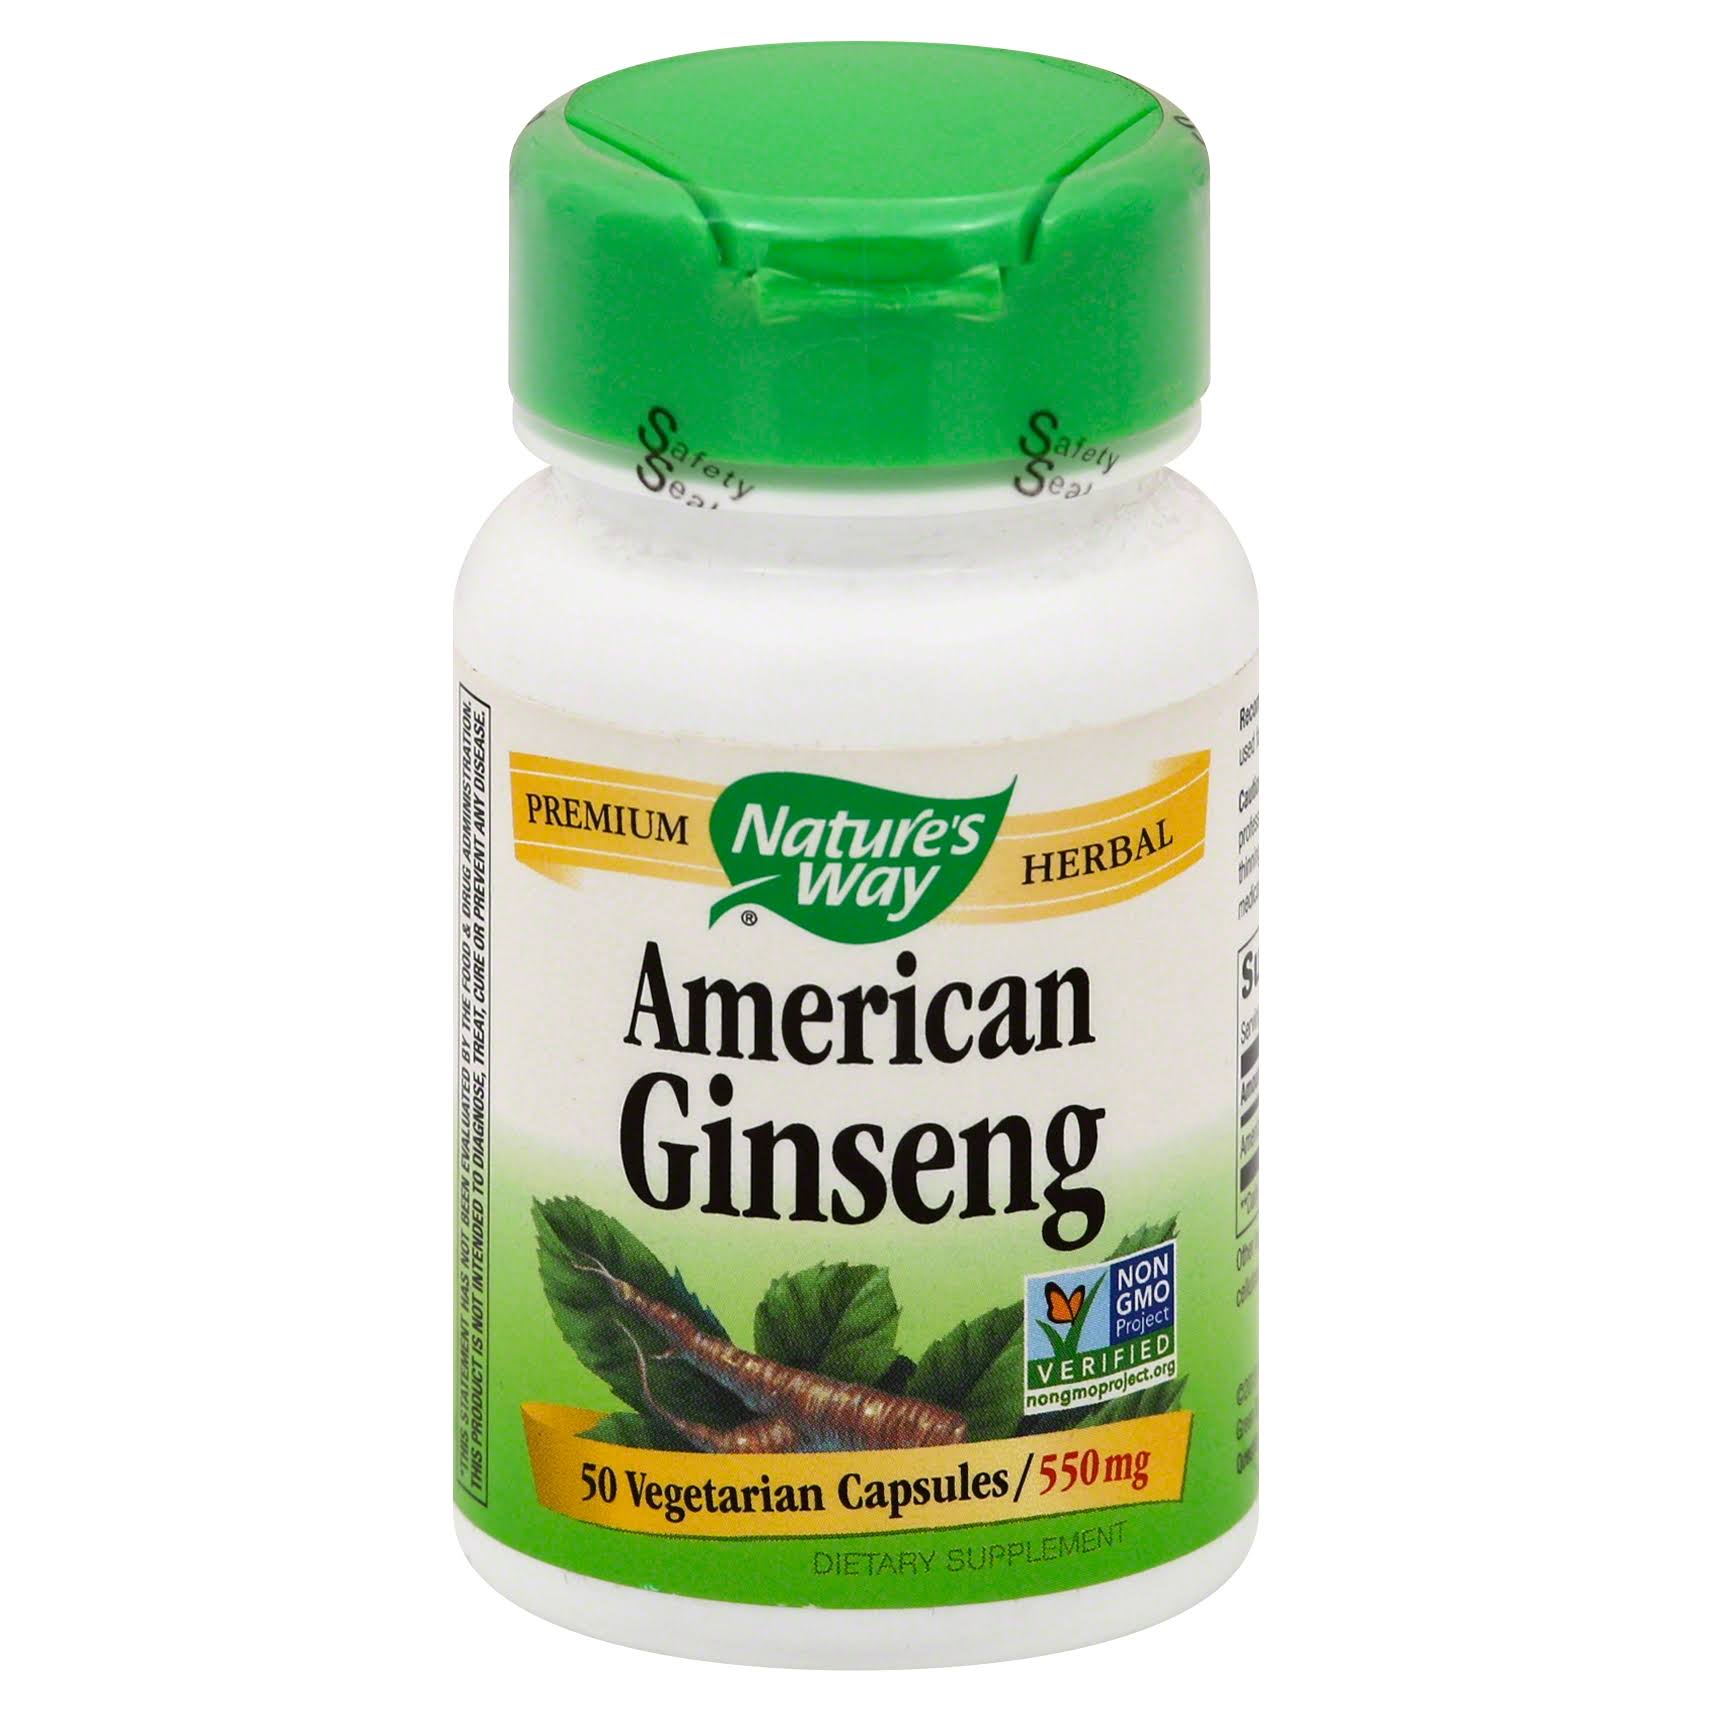 Nature's Way American Ginseng Root Dietary Supplement - 50 Capsules